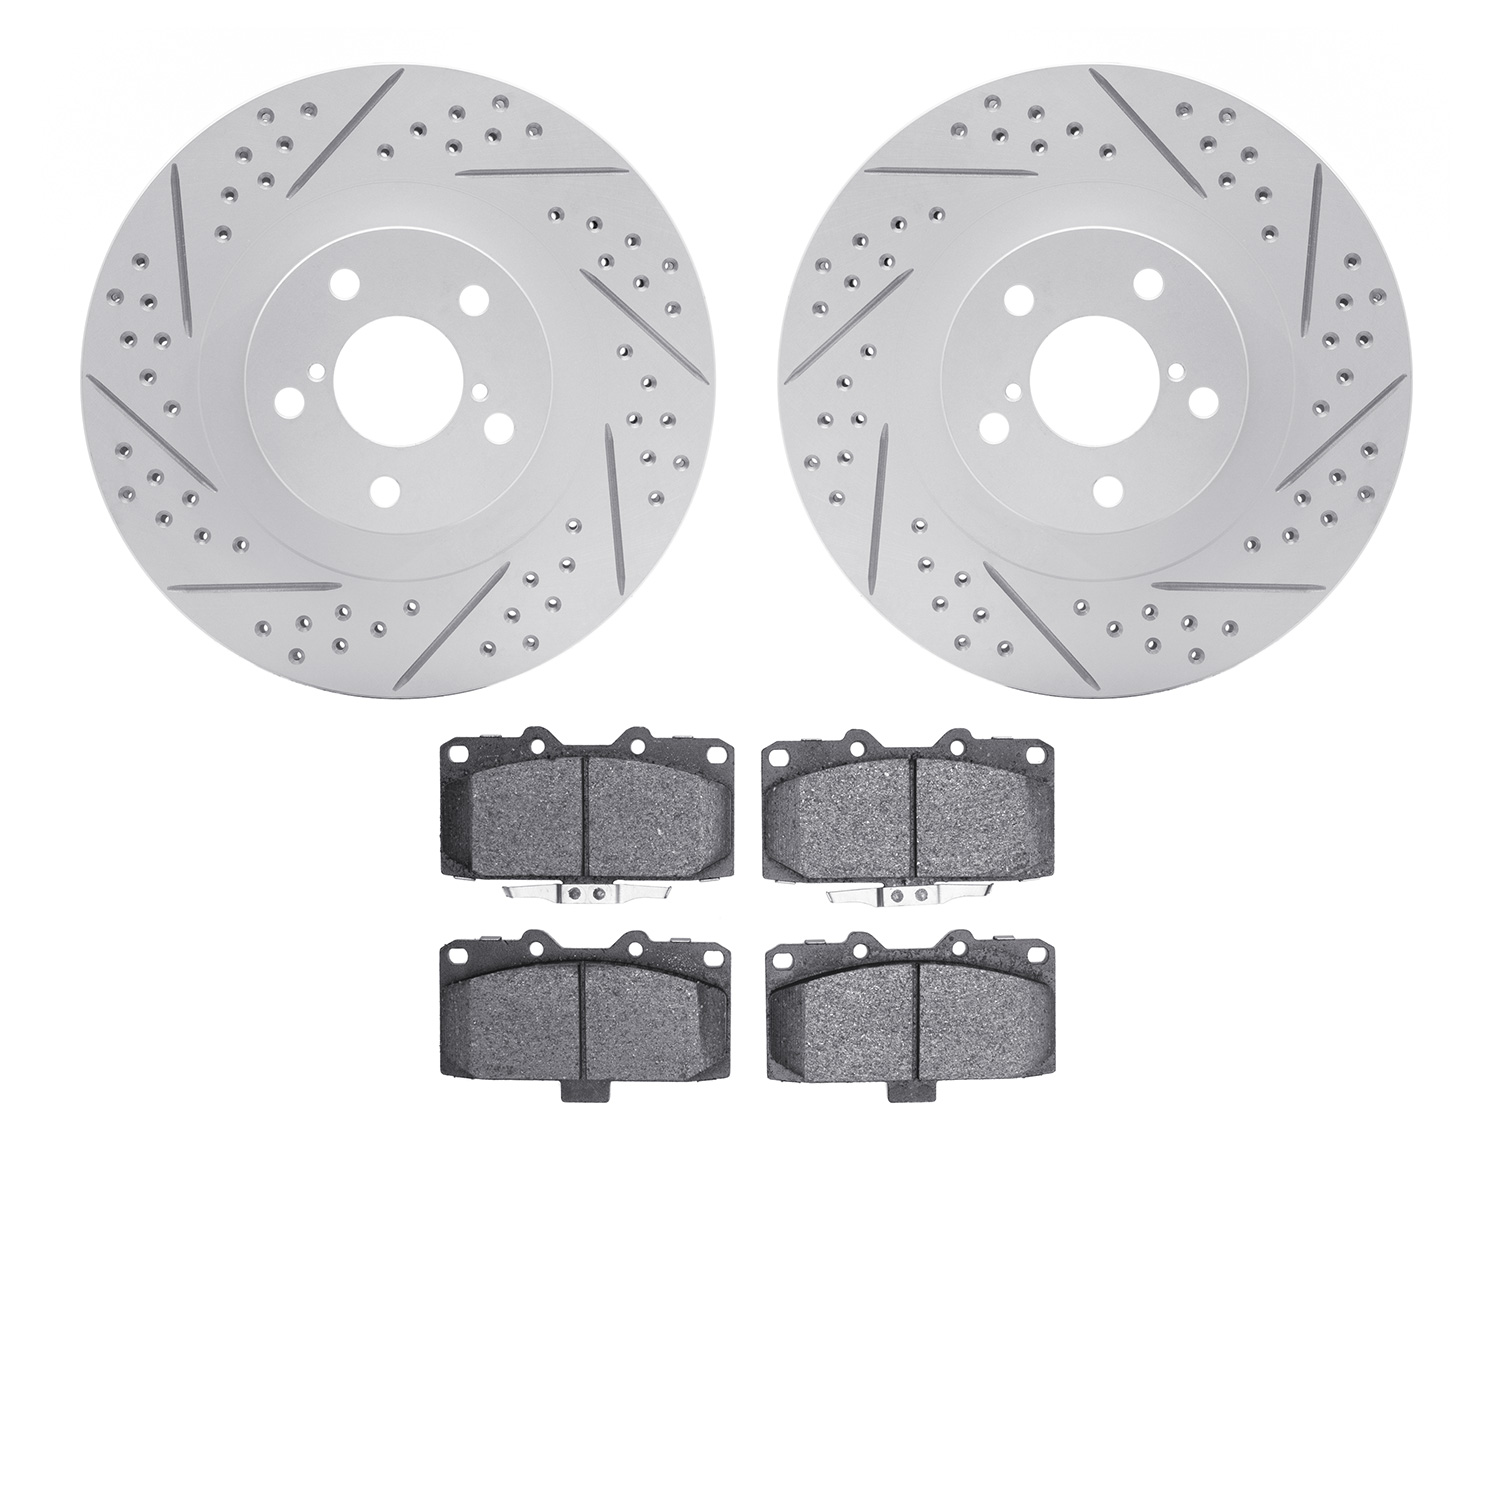 2502-13031 Geoperformance Drilled/Slotted Rotors w/5000 Advanced Brake Pads Kit, 2006-2007 Subaru, Position: Front